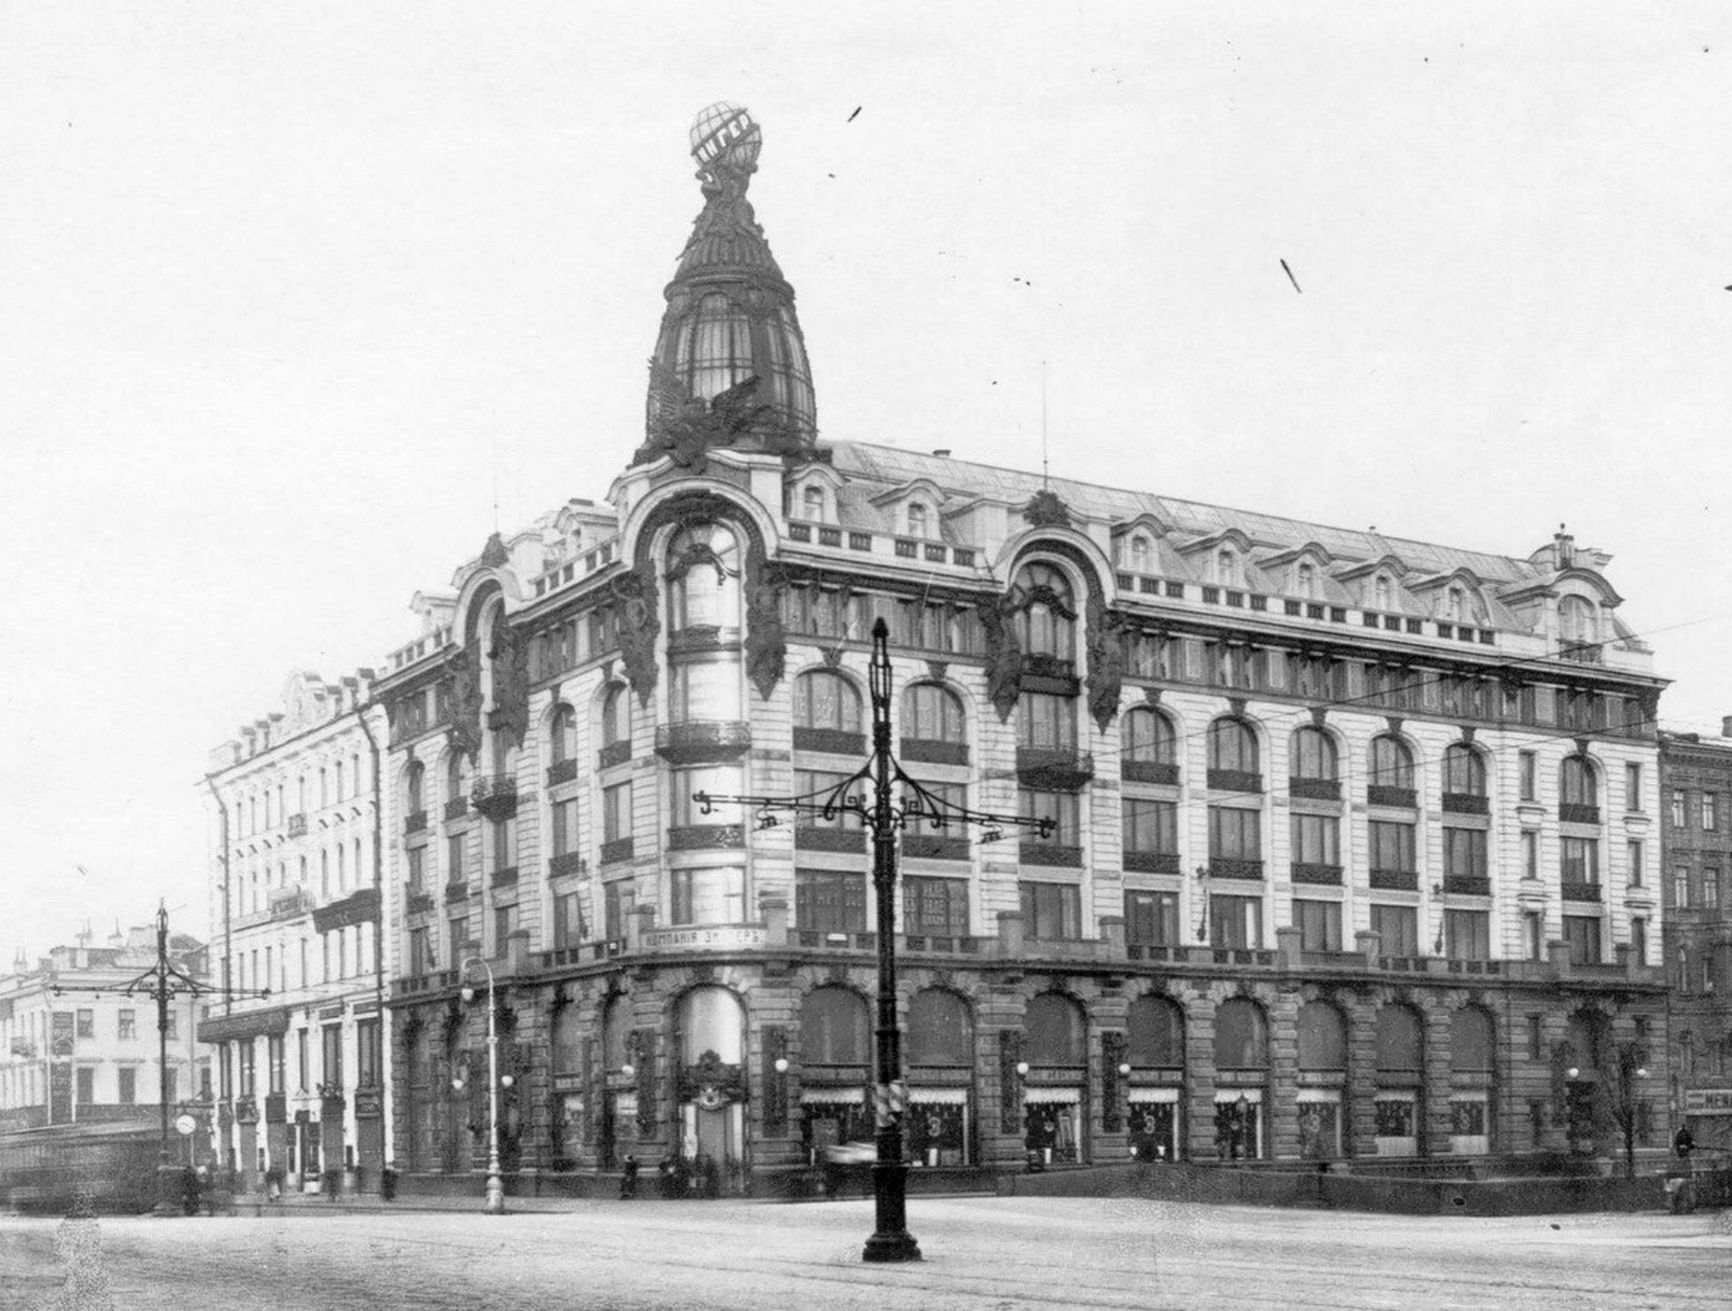 Historical building of the Singer House in St. Petersburg, now a bookstore on Nevsky Prospekt